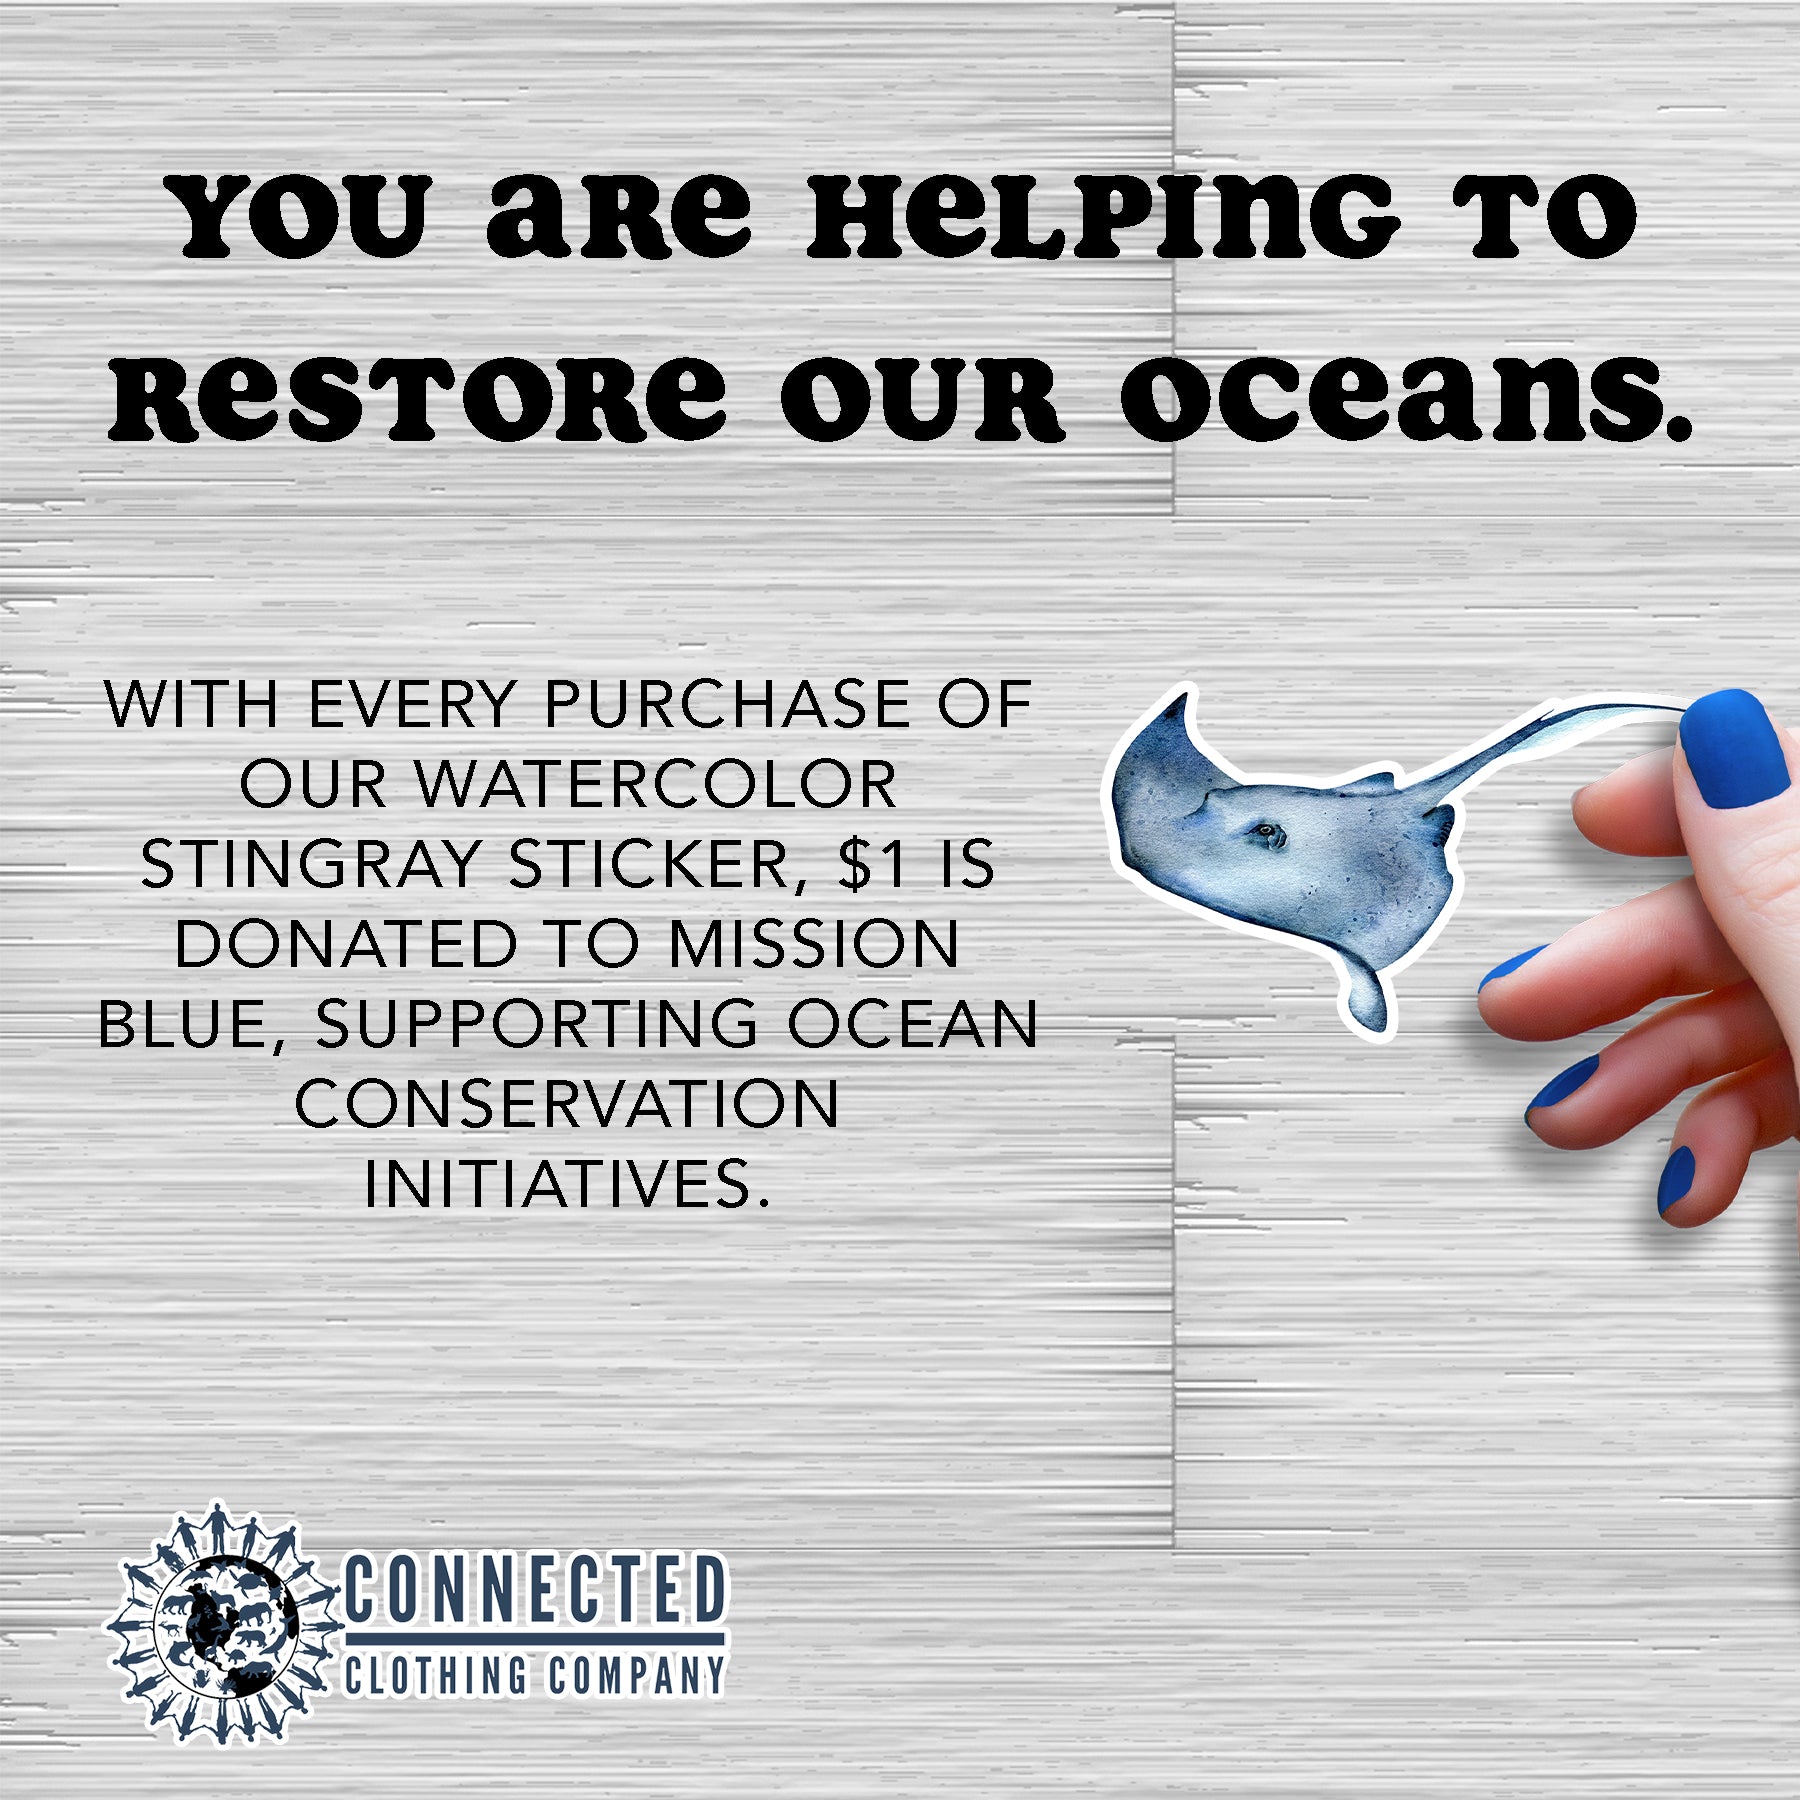 Stingray Sticker - Connected Clothing Company - 10% of proceeds donated to ocean conservation